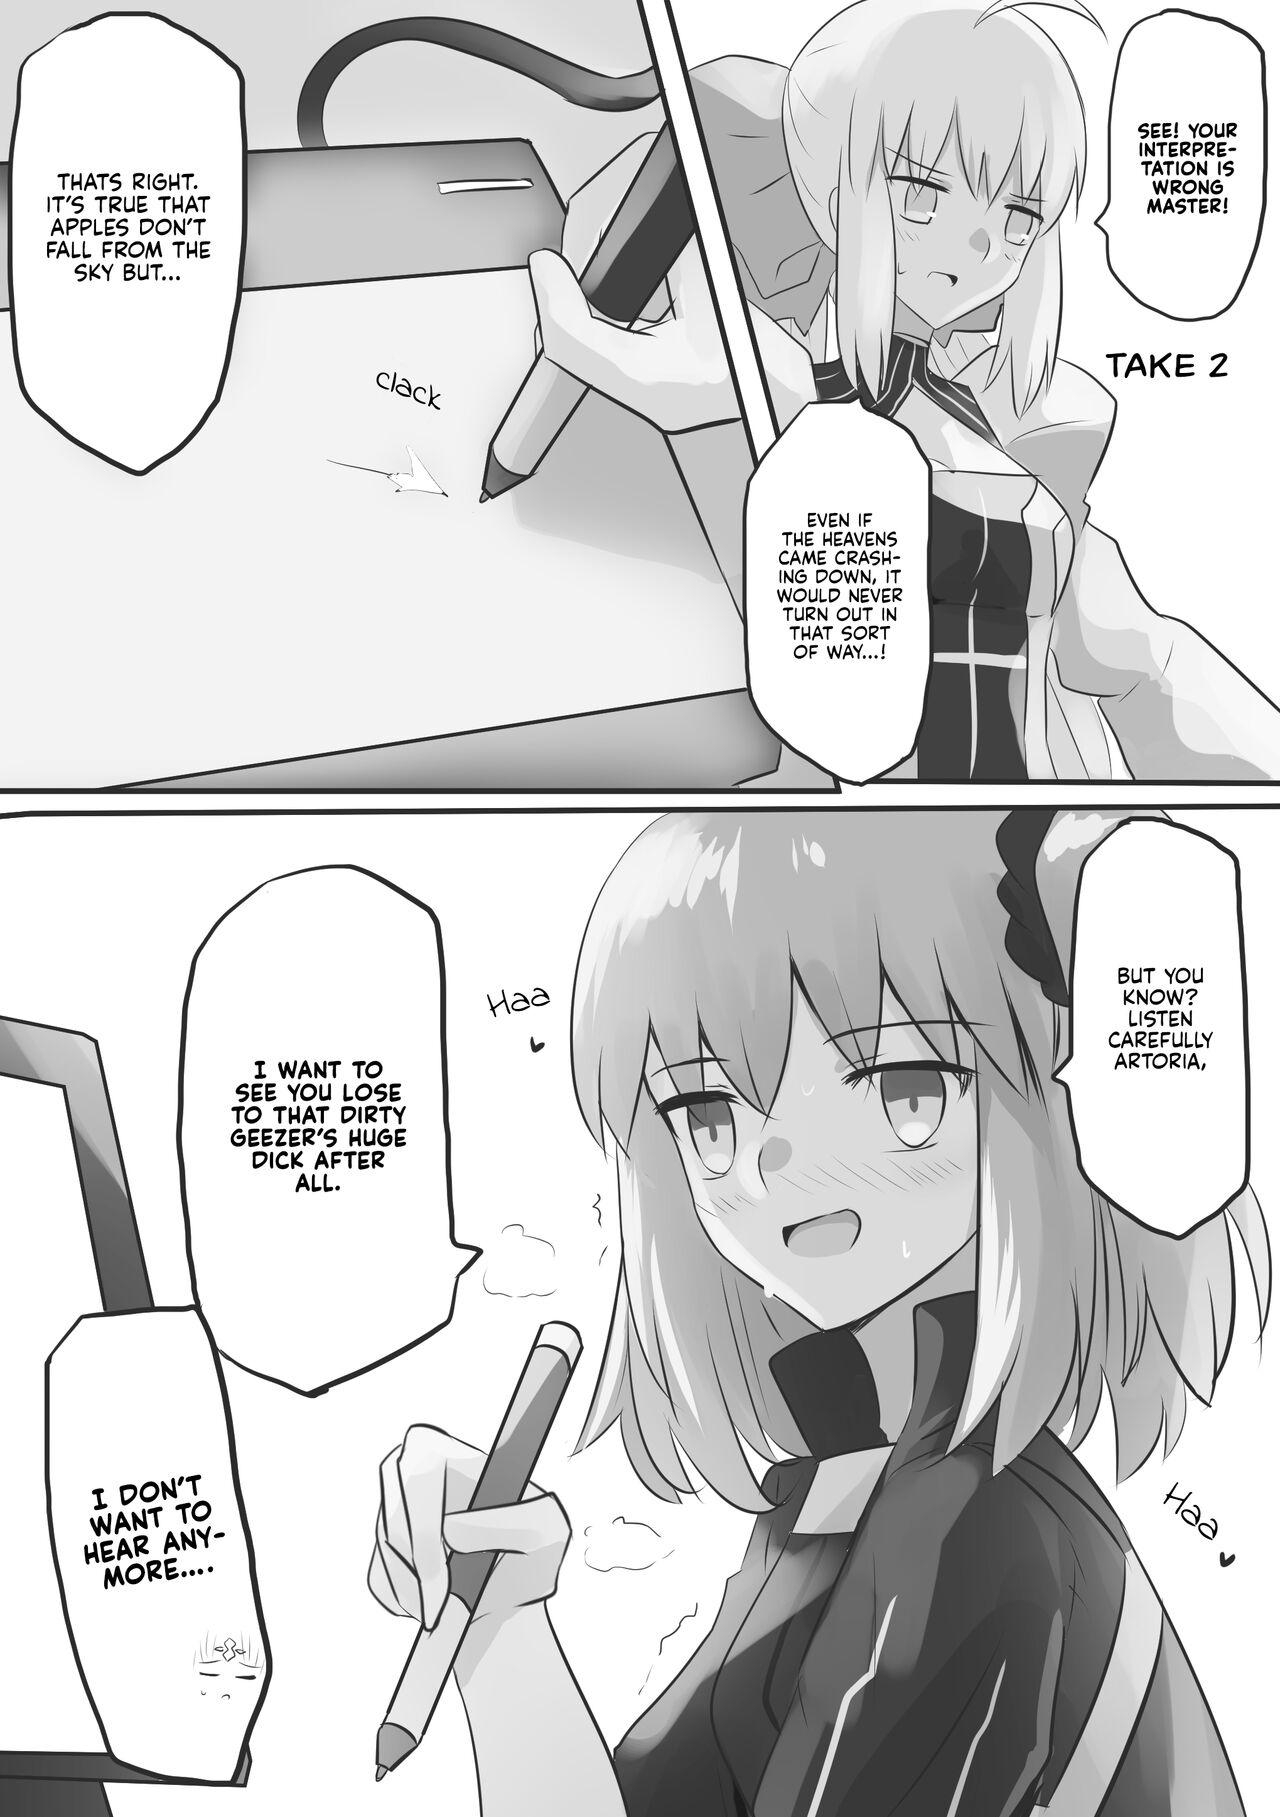 Old Man Mura x Caster 1 - Fate grand order Step Sister - Page 8